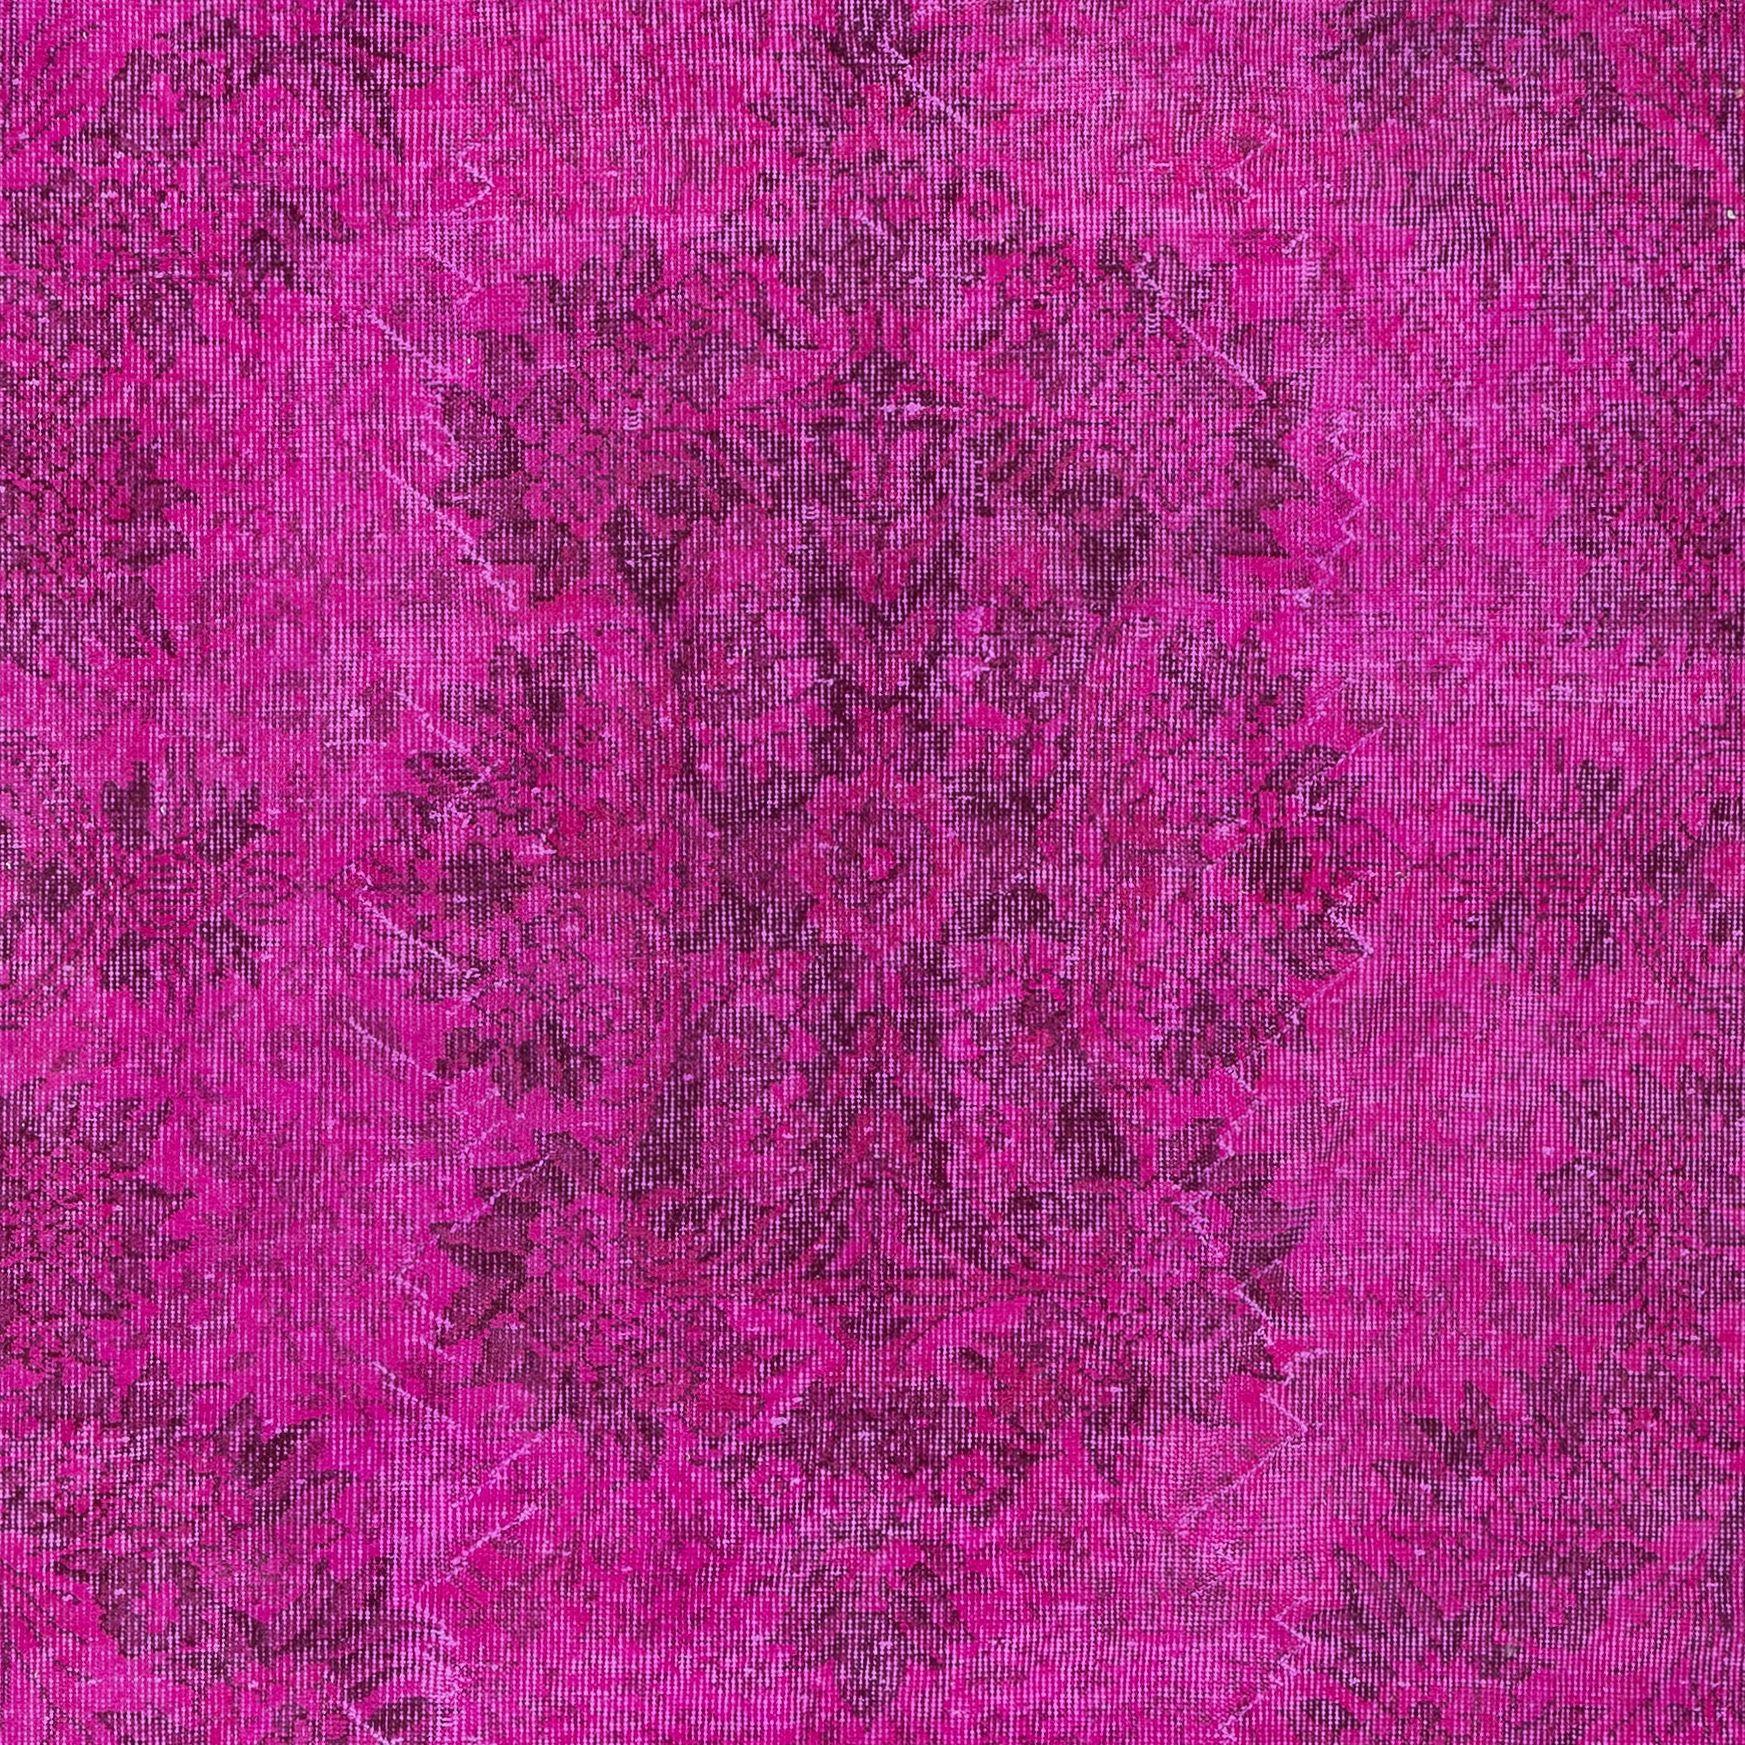 5.8x9.6 Ft Pink Area Rug, Handknotted in Turkey, Ideal for Modern Interiors In Good Condition For Sale In Philadelphia, PA